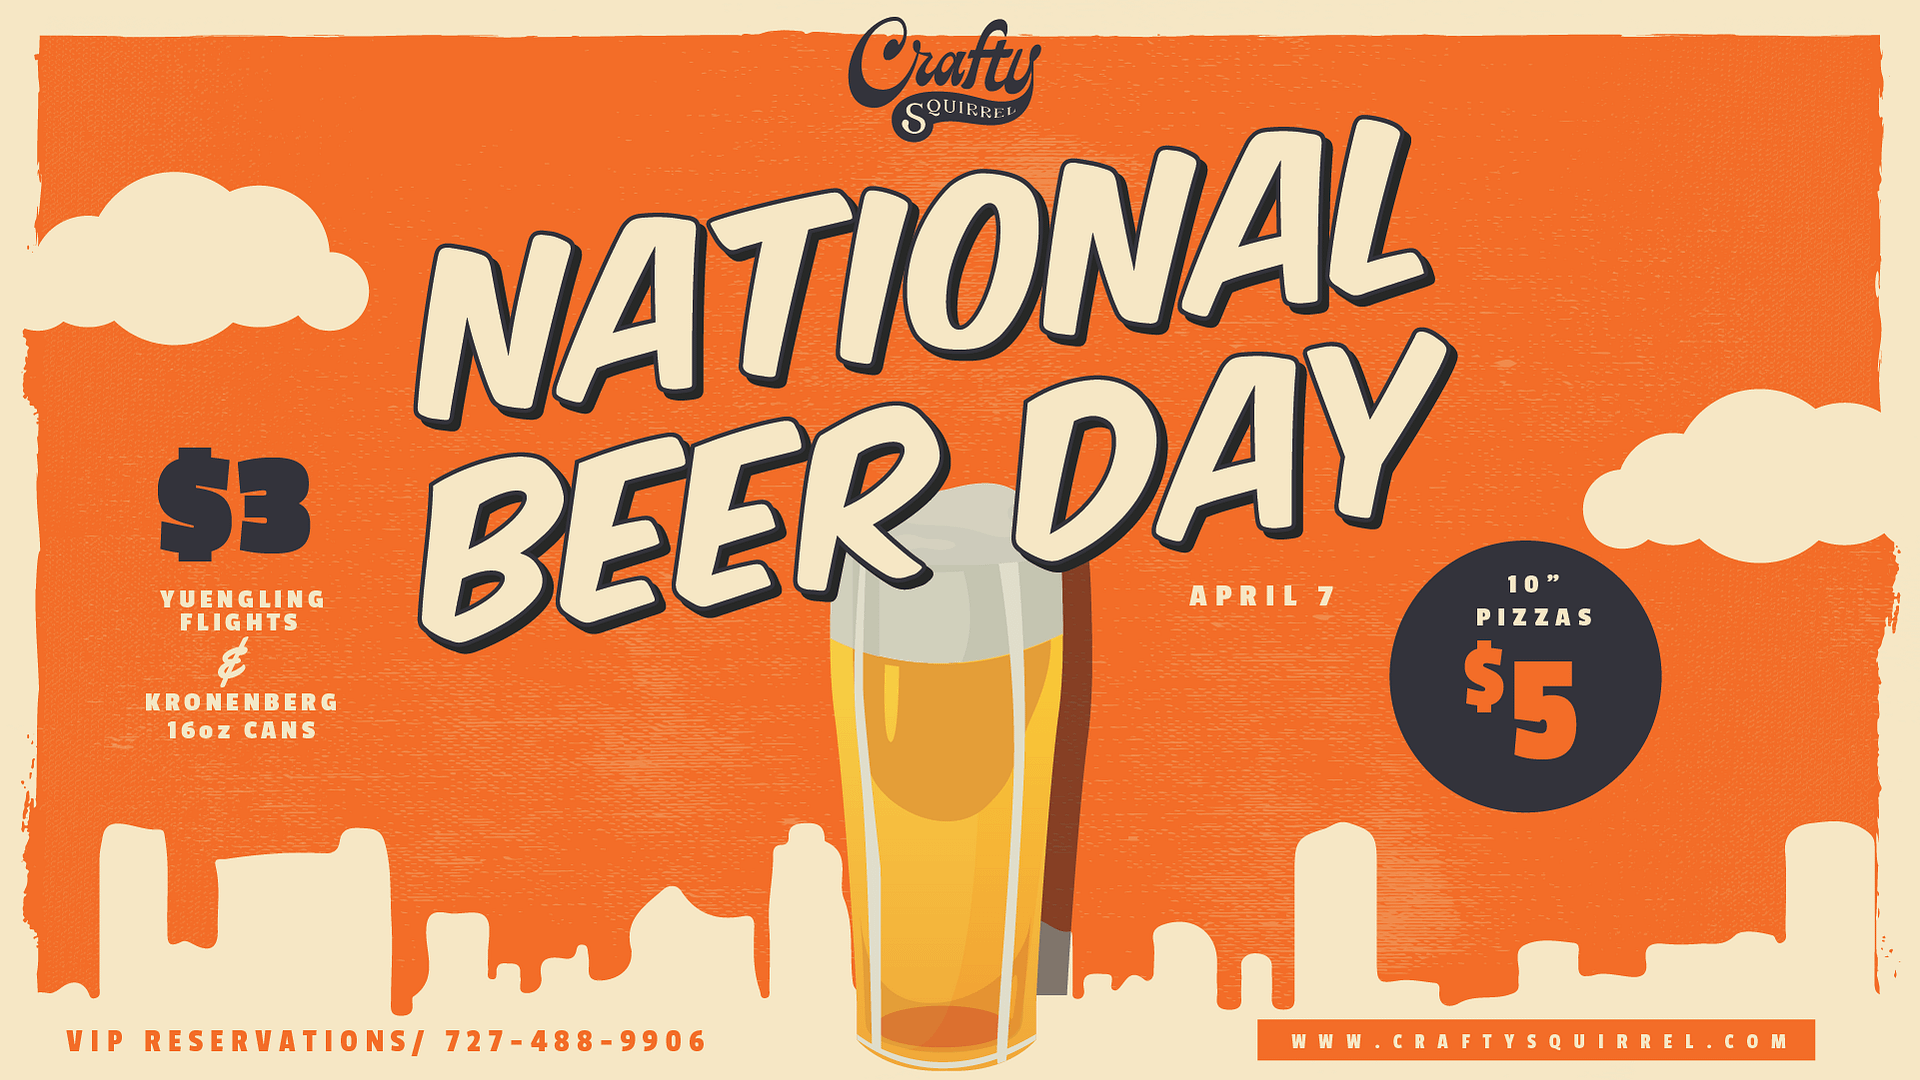 National Beer Day at the Crafty Squirrel